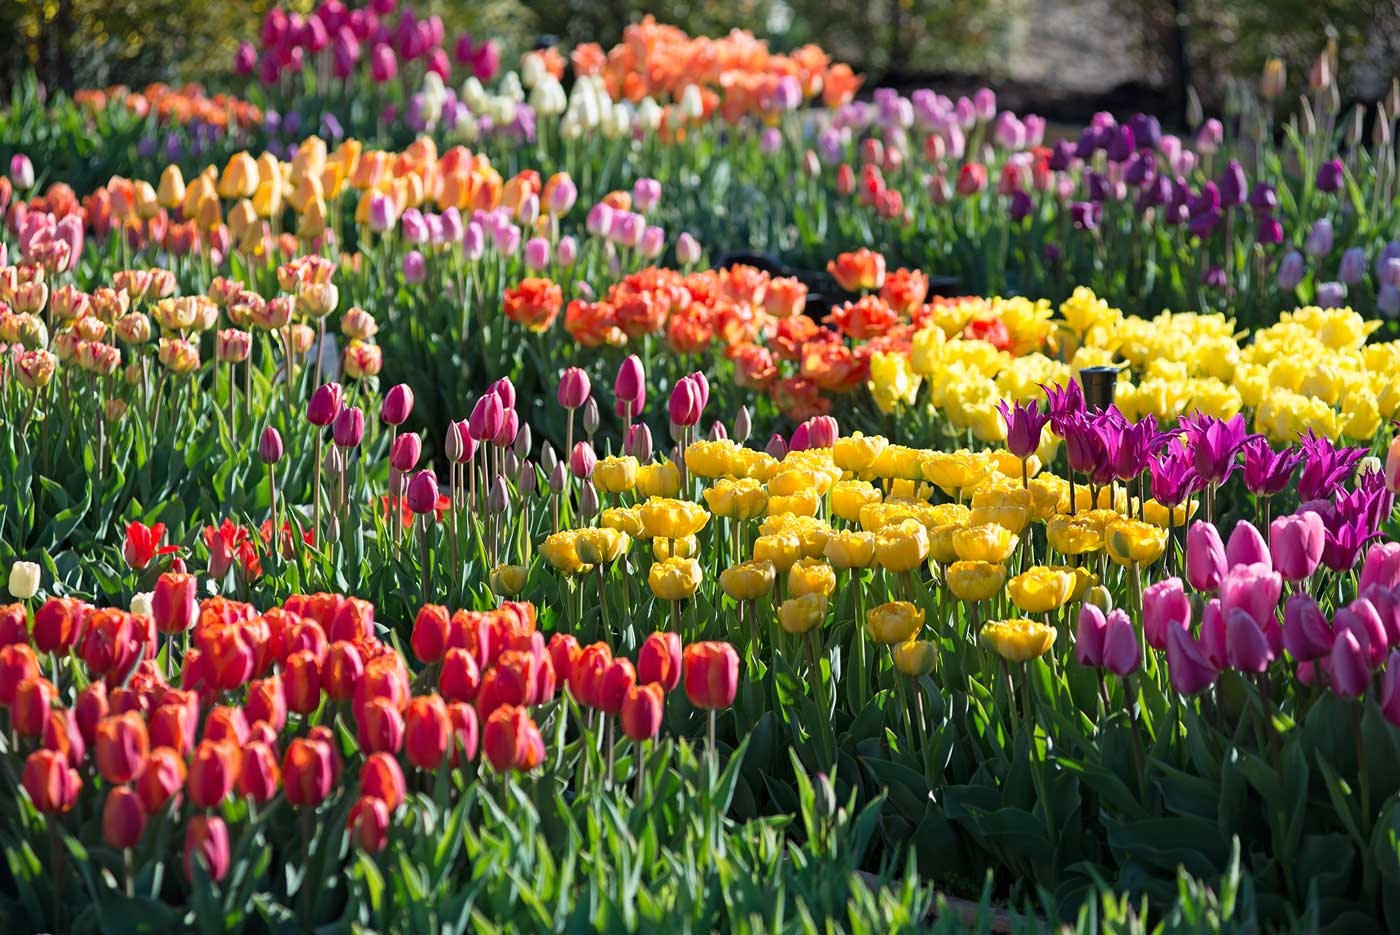 How Was Your Spring Bulb Garden?